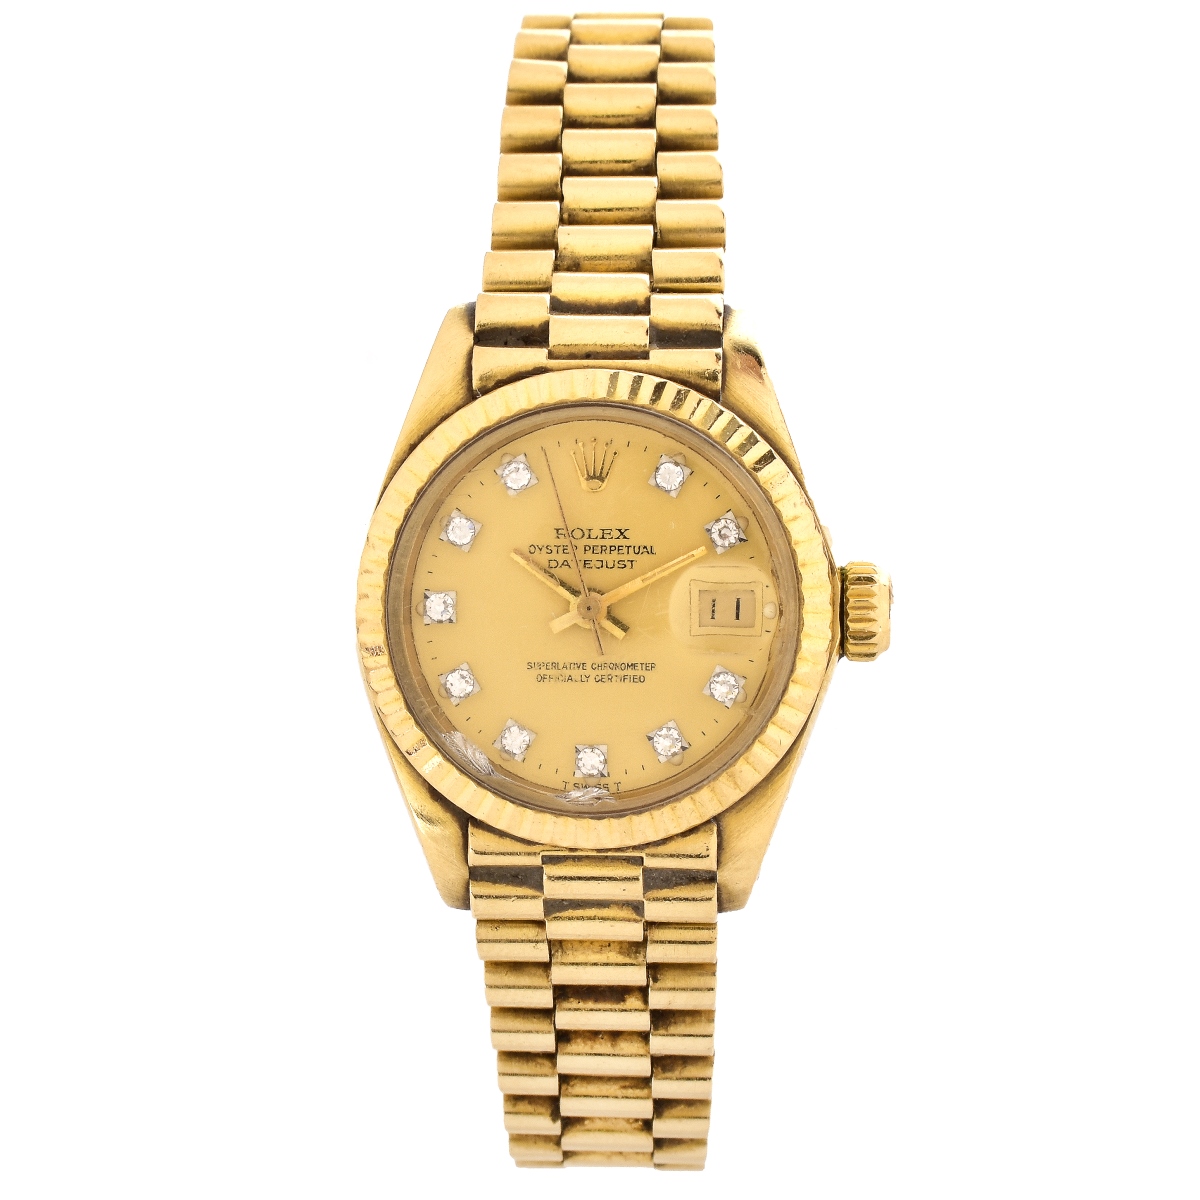 Lady's Rolex 18K Gold Date Just Watch